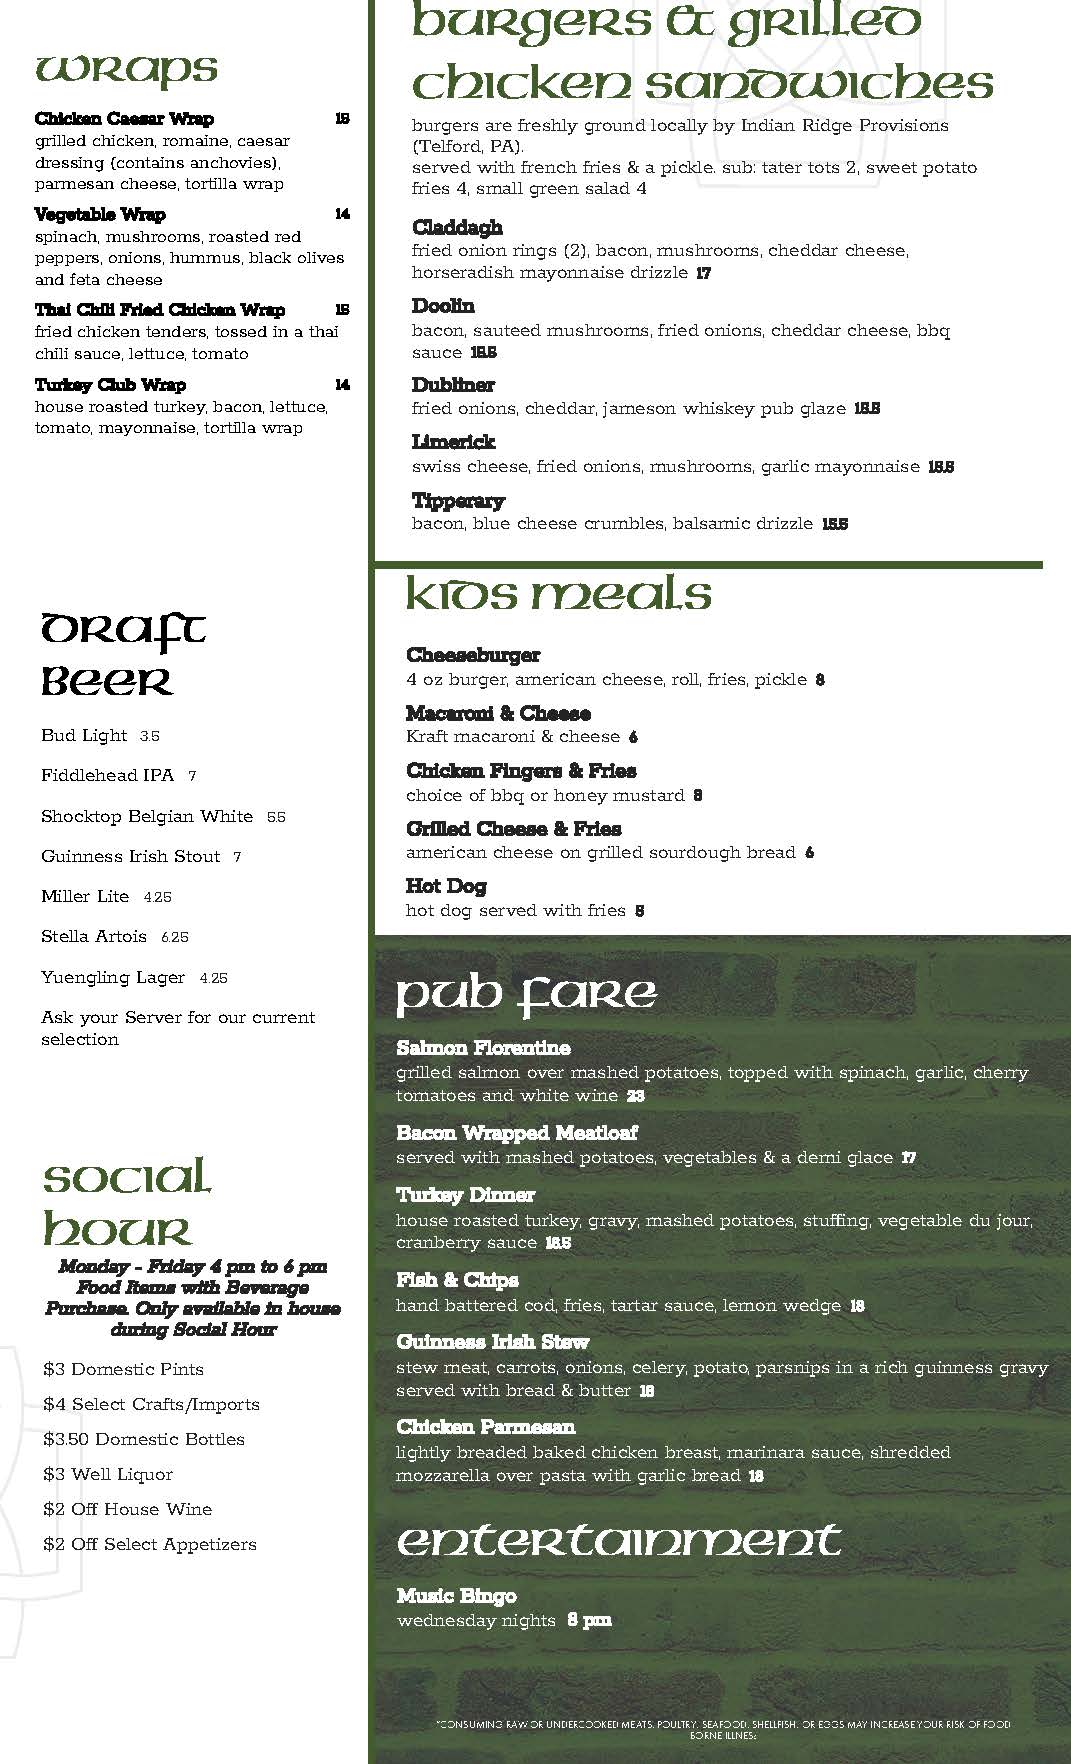 A menu for a restaurant with a green background.